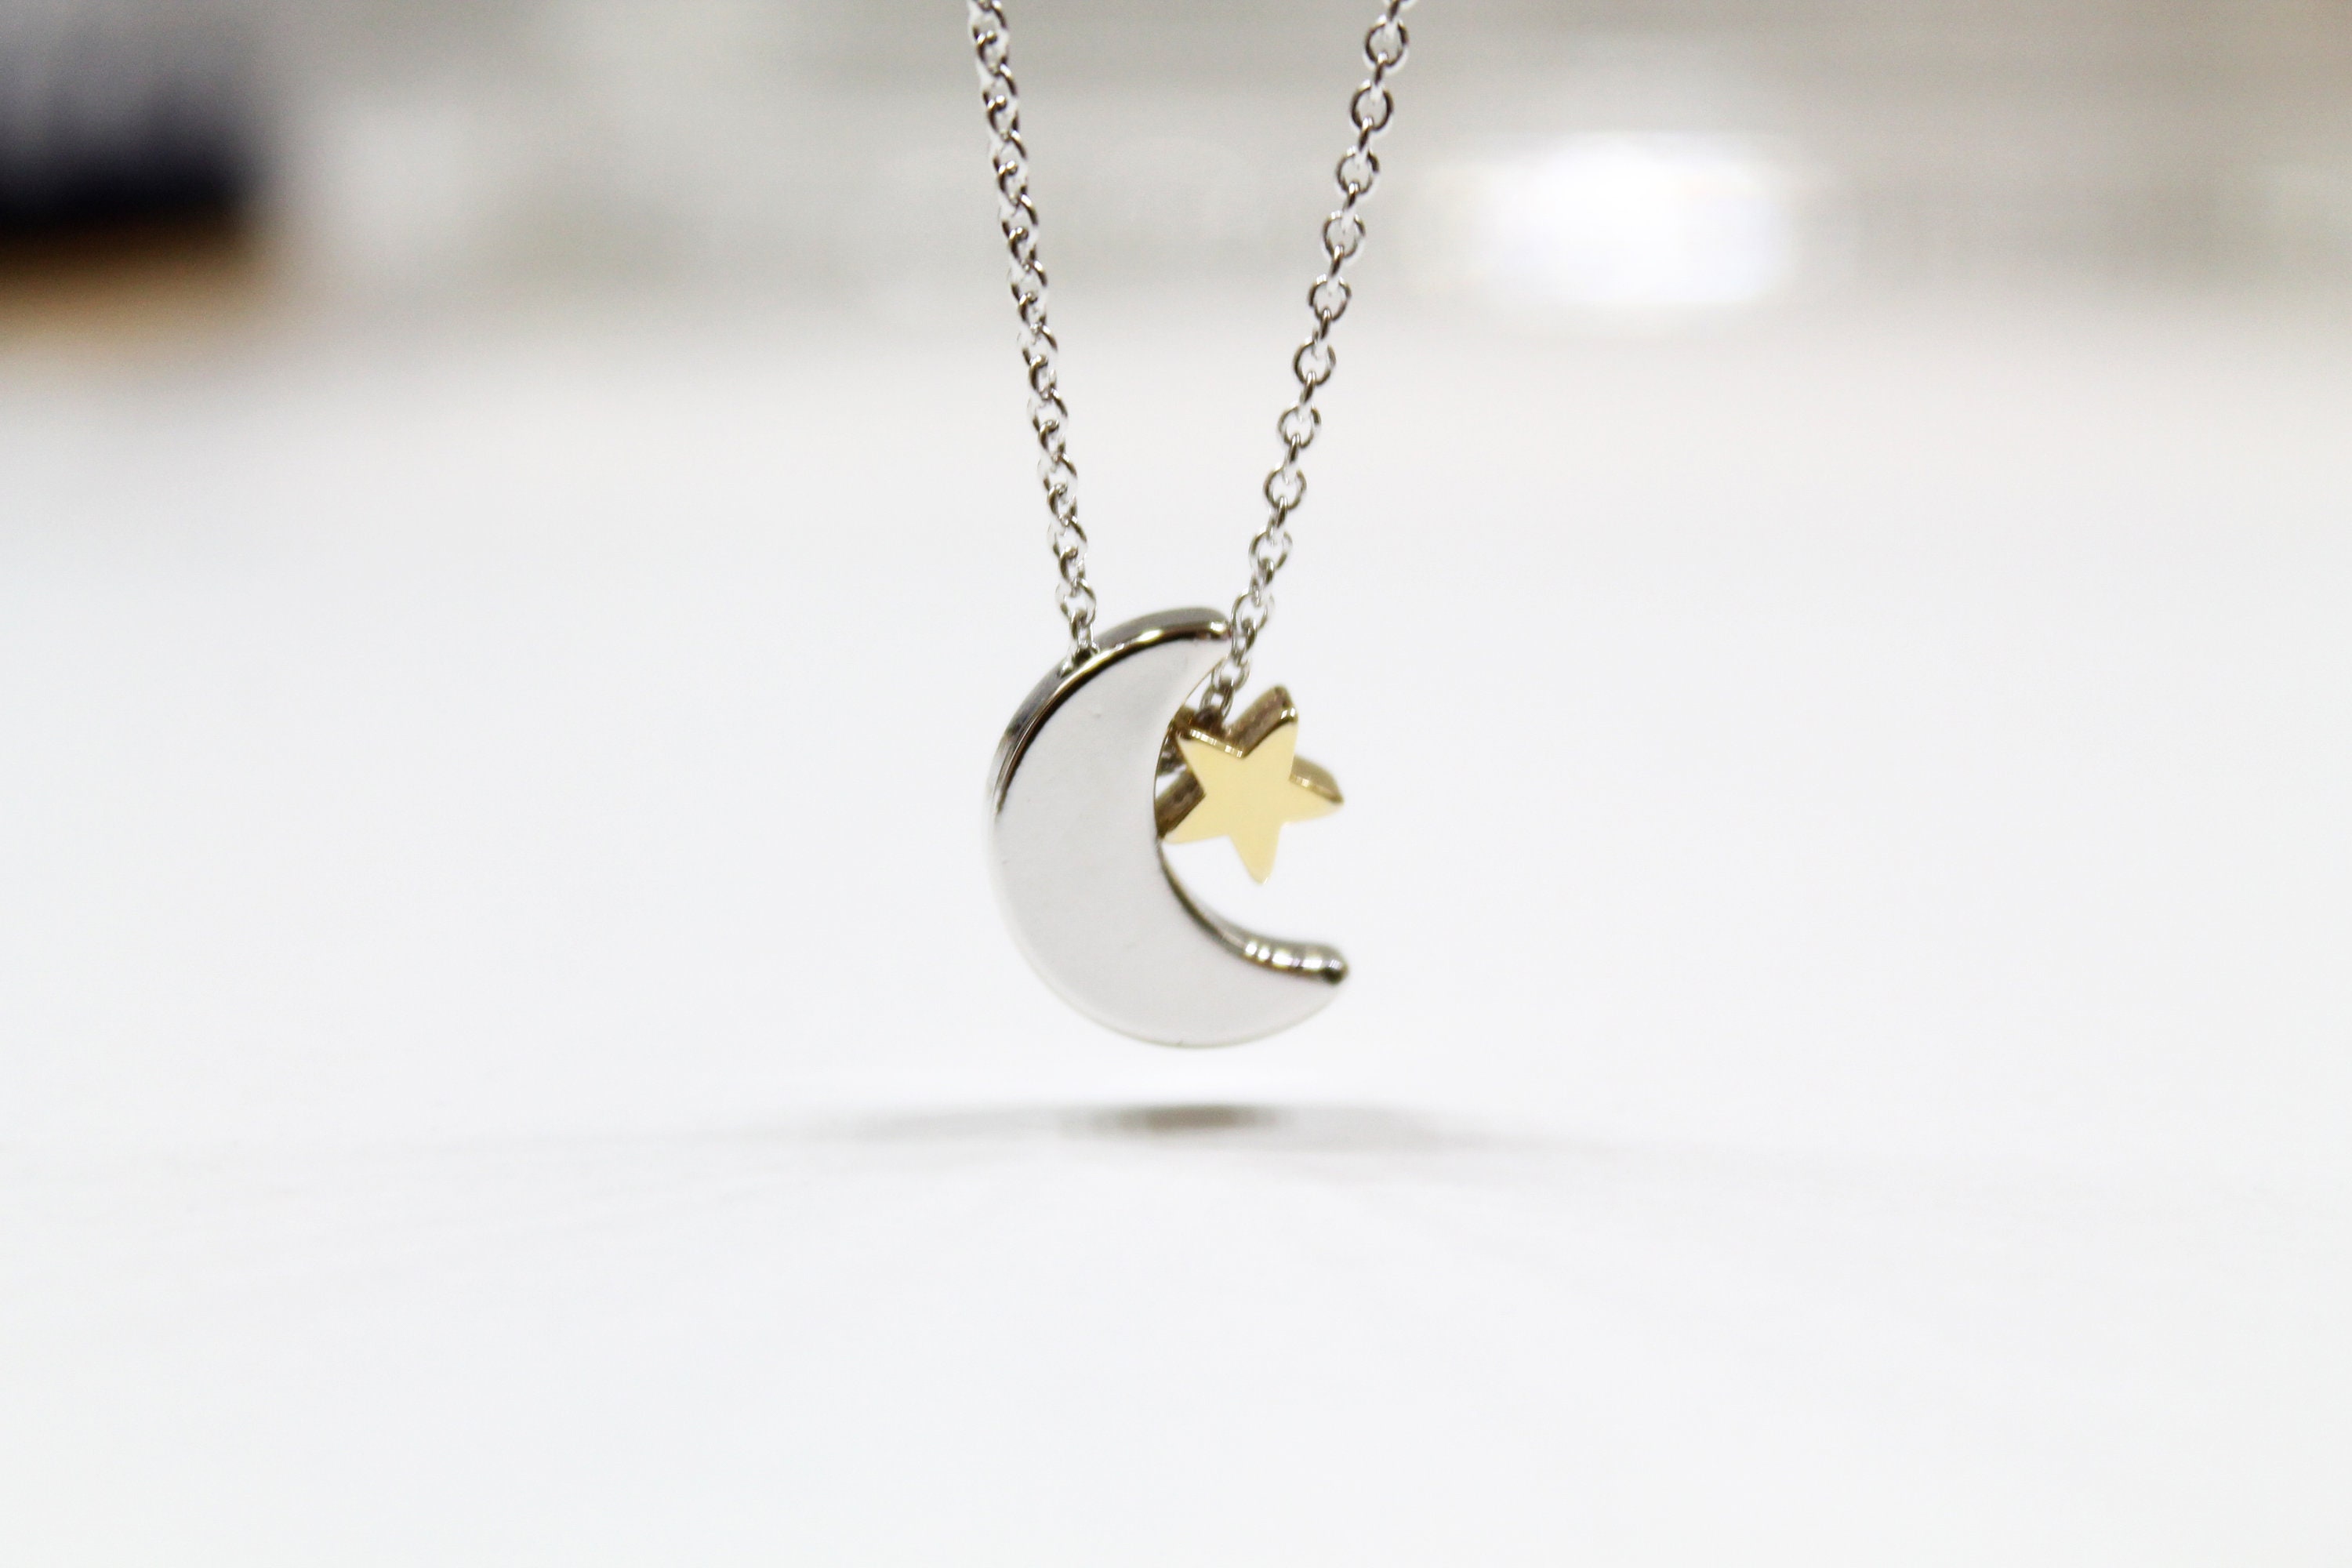 Small star pendant necklace in Sterling Silver or Gold. – Thea Grant